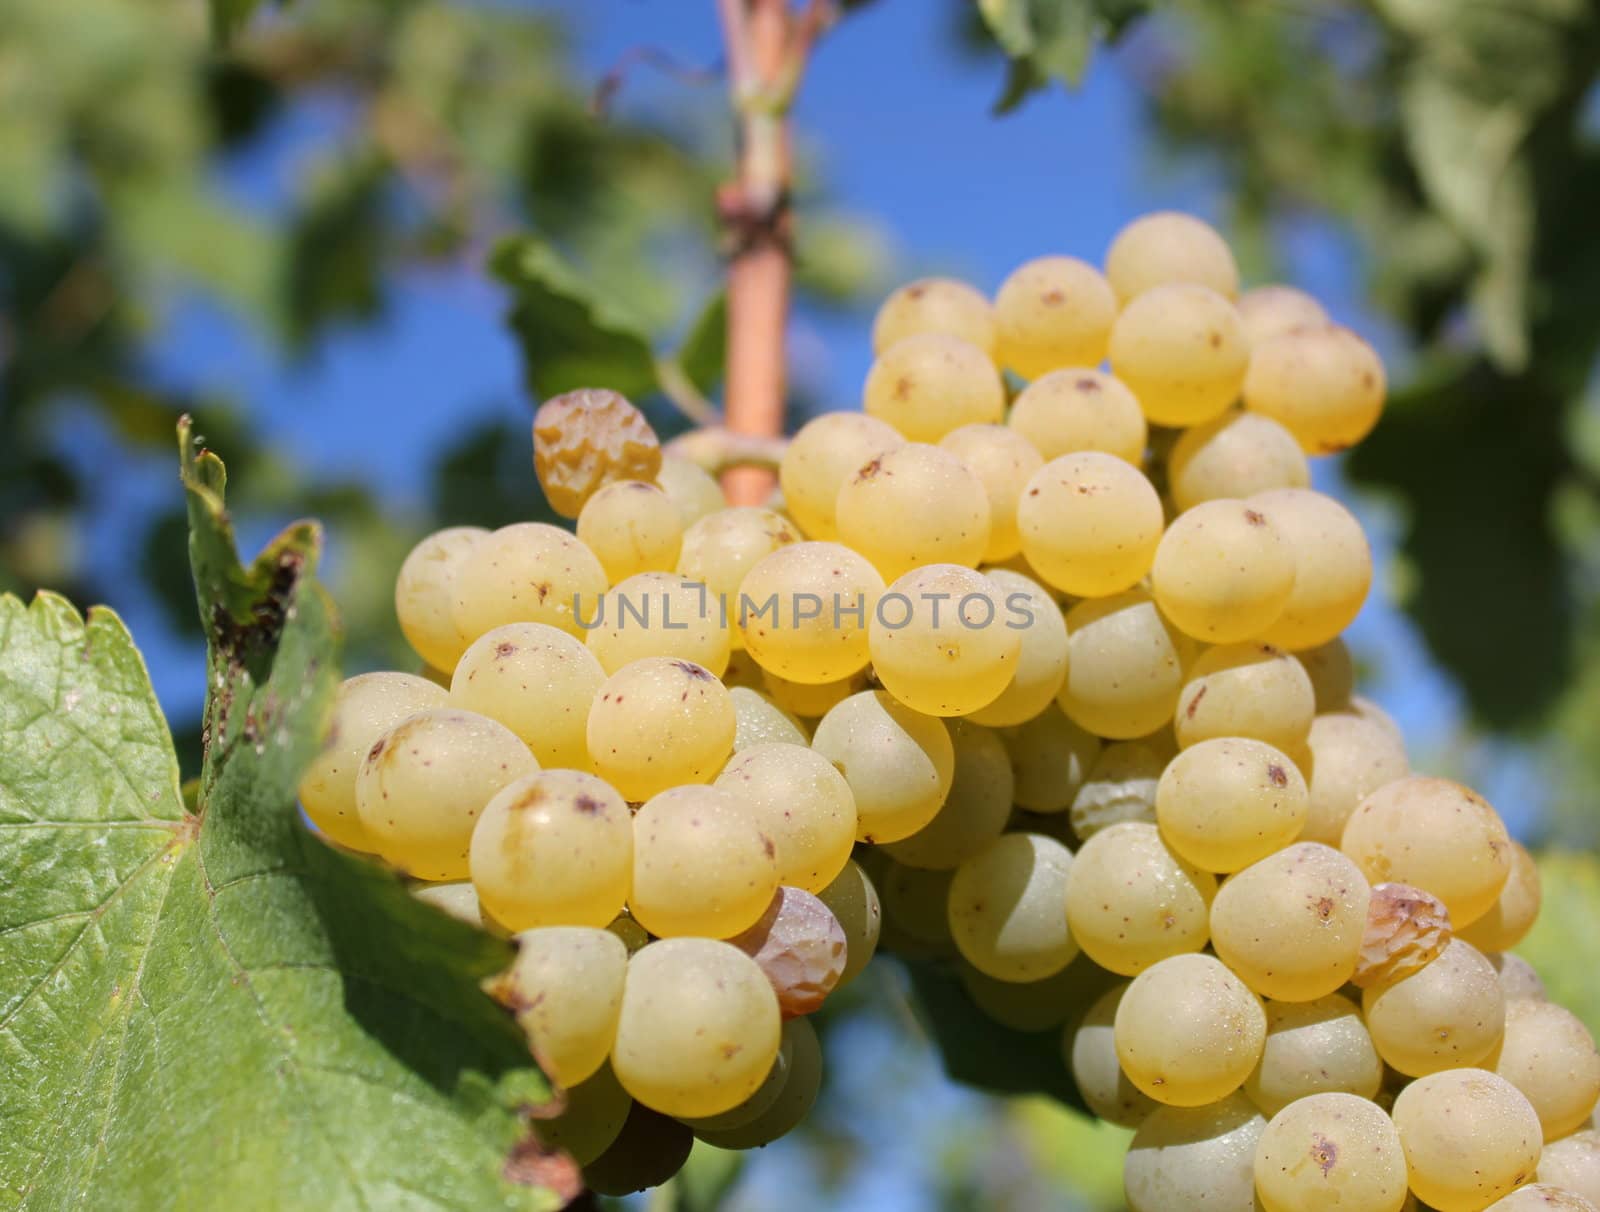 Sunny green grape surrounded by green leaves in a vineyard by summer